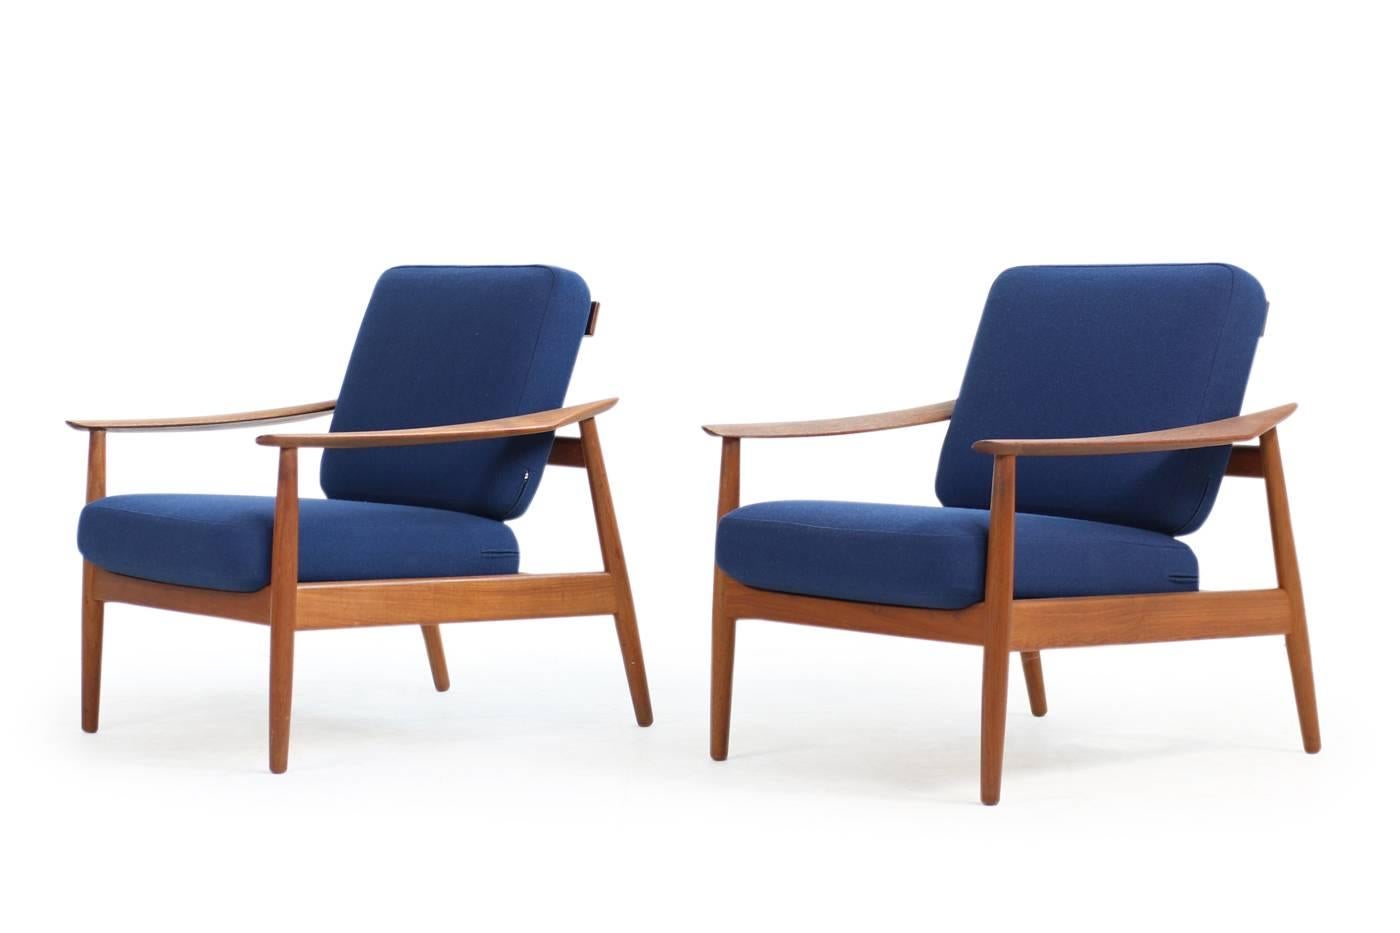 Beautiful pair of 1960s Arne Vodder easy chairs, renewed upholstery and covered with new woven fabric in dark blue. Super good condition.